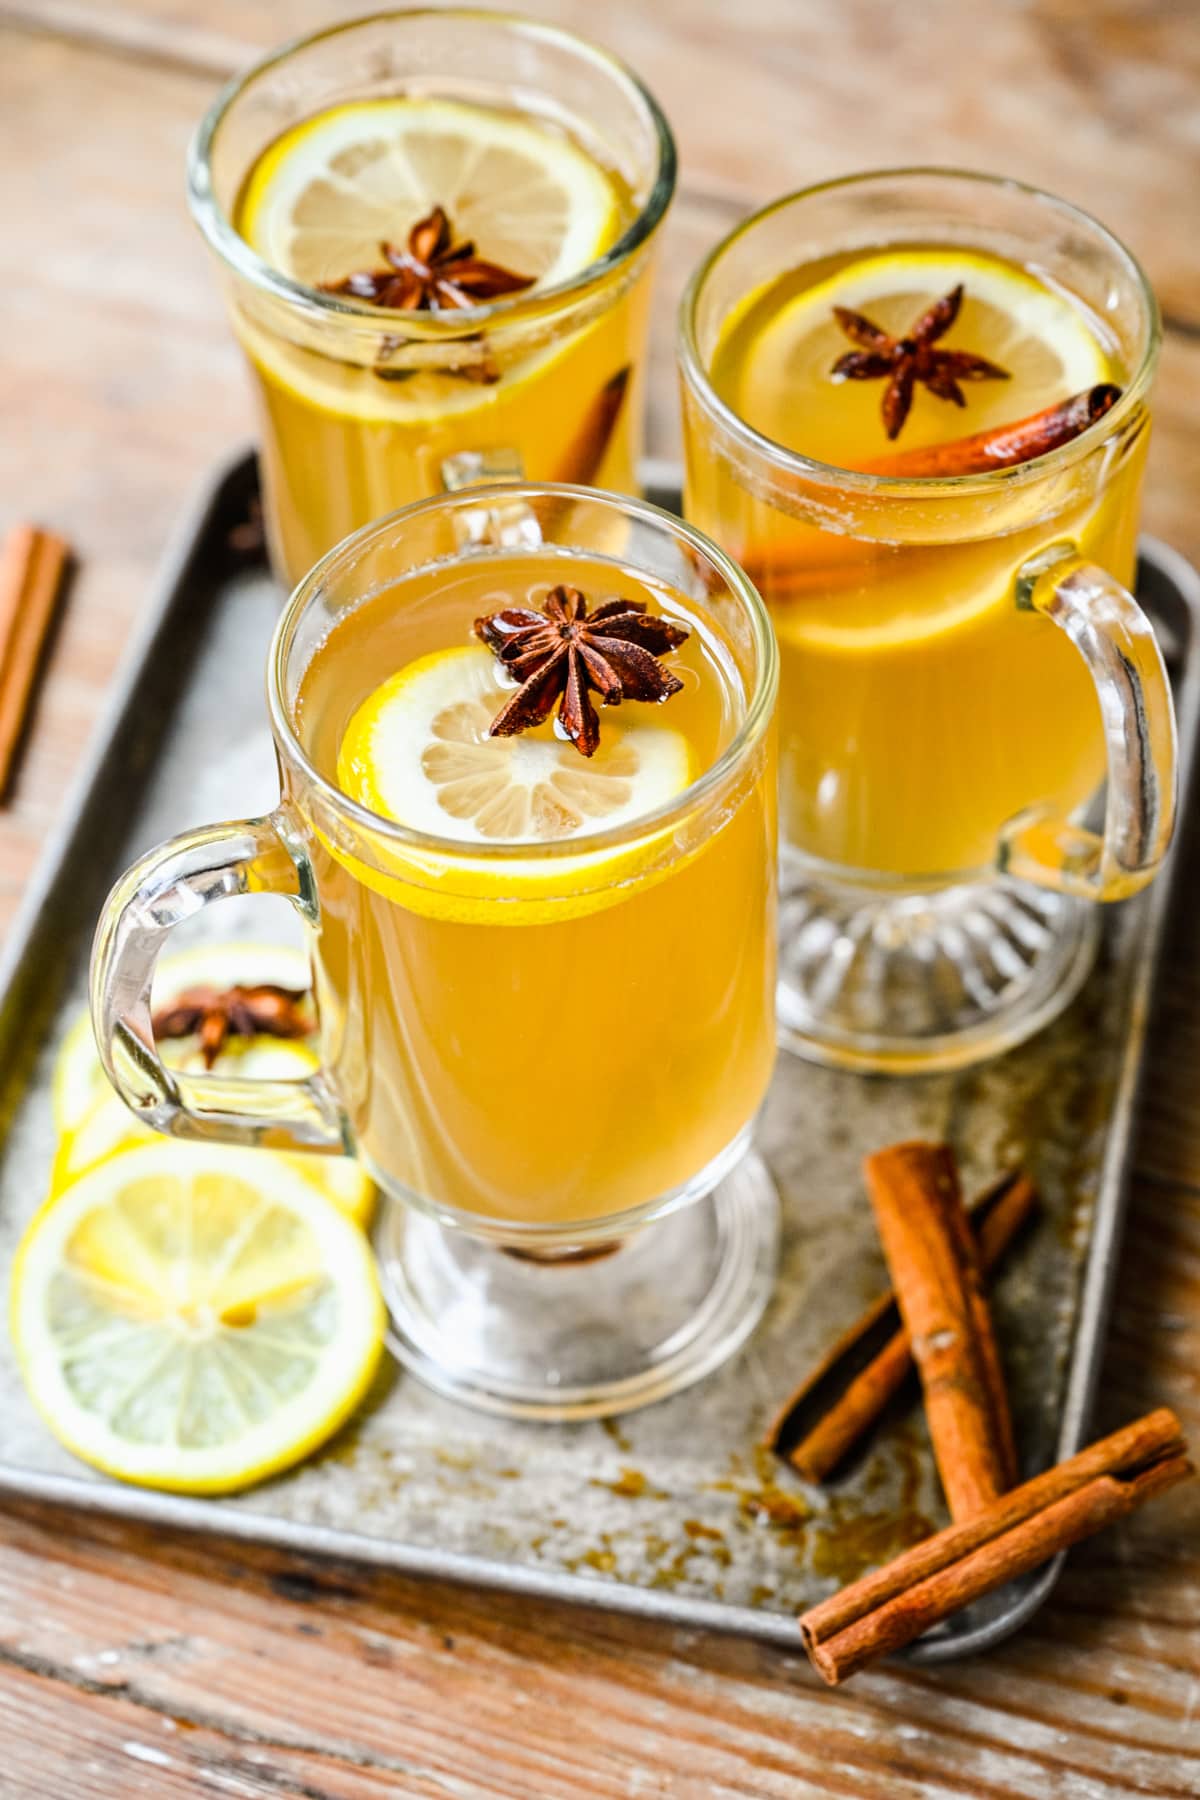 Overhead view of the finished hot toddy cocktails with lemon slices on top.